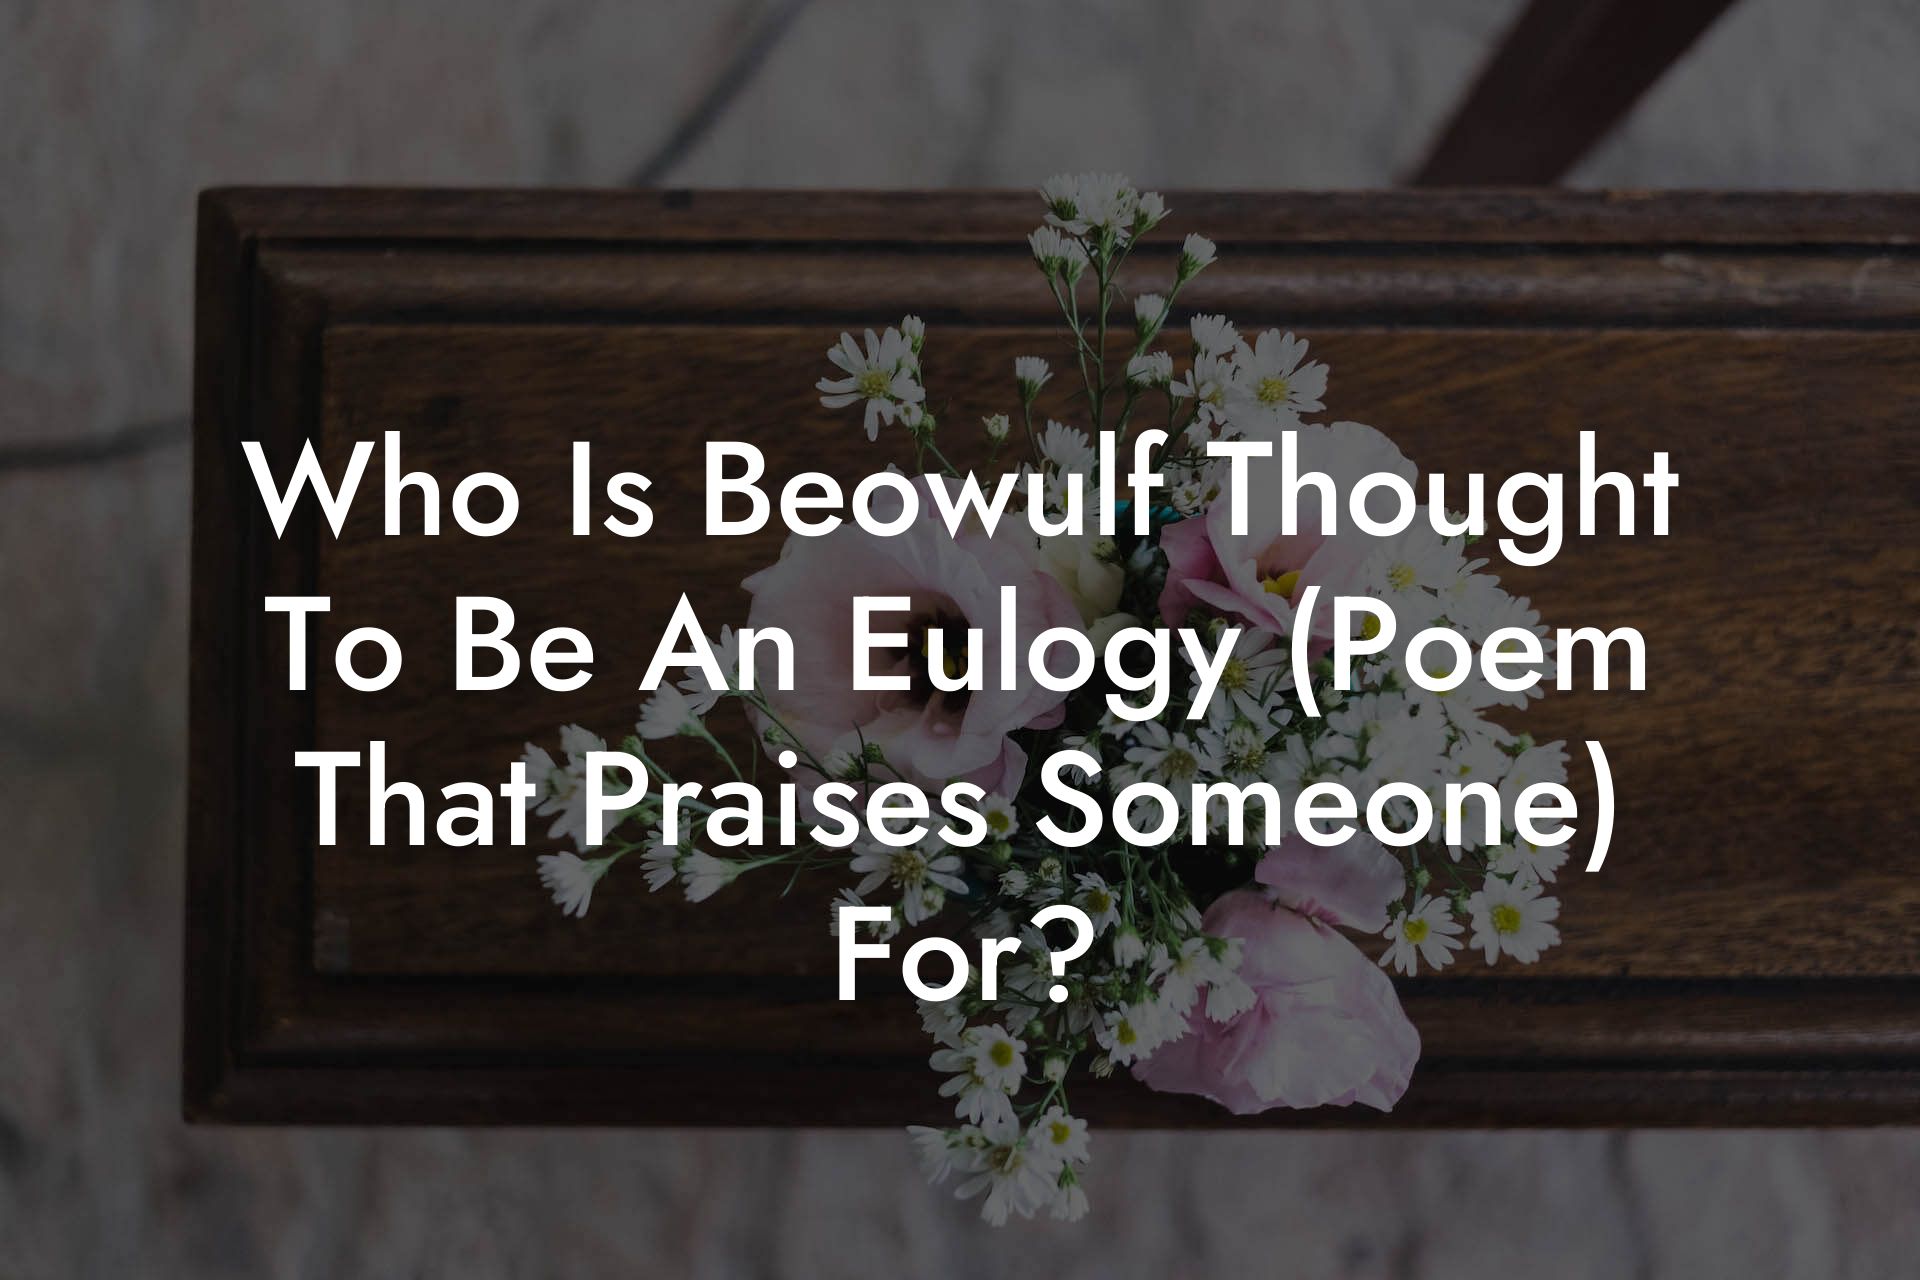 Who Is Beowulf Thought To Be An Eulogy (Poem That Praises Someone) For?